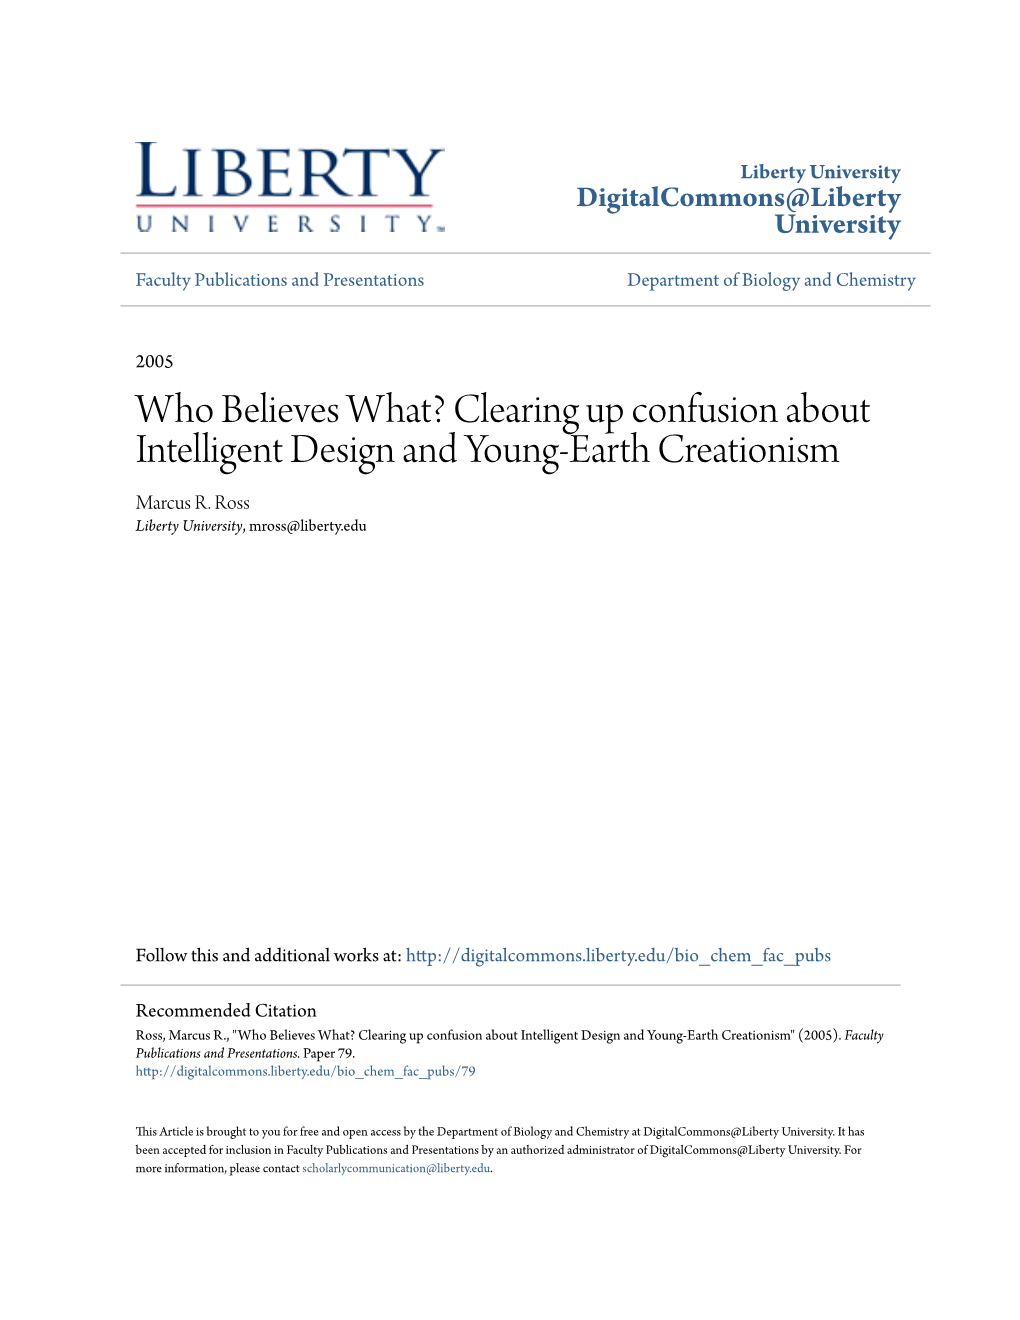 Clearing up Confusion About Intelligent Design and Young-Earth Creationism Marcus R